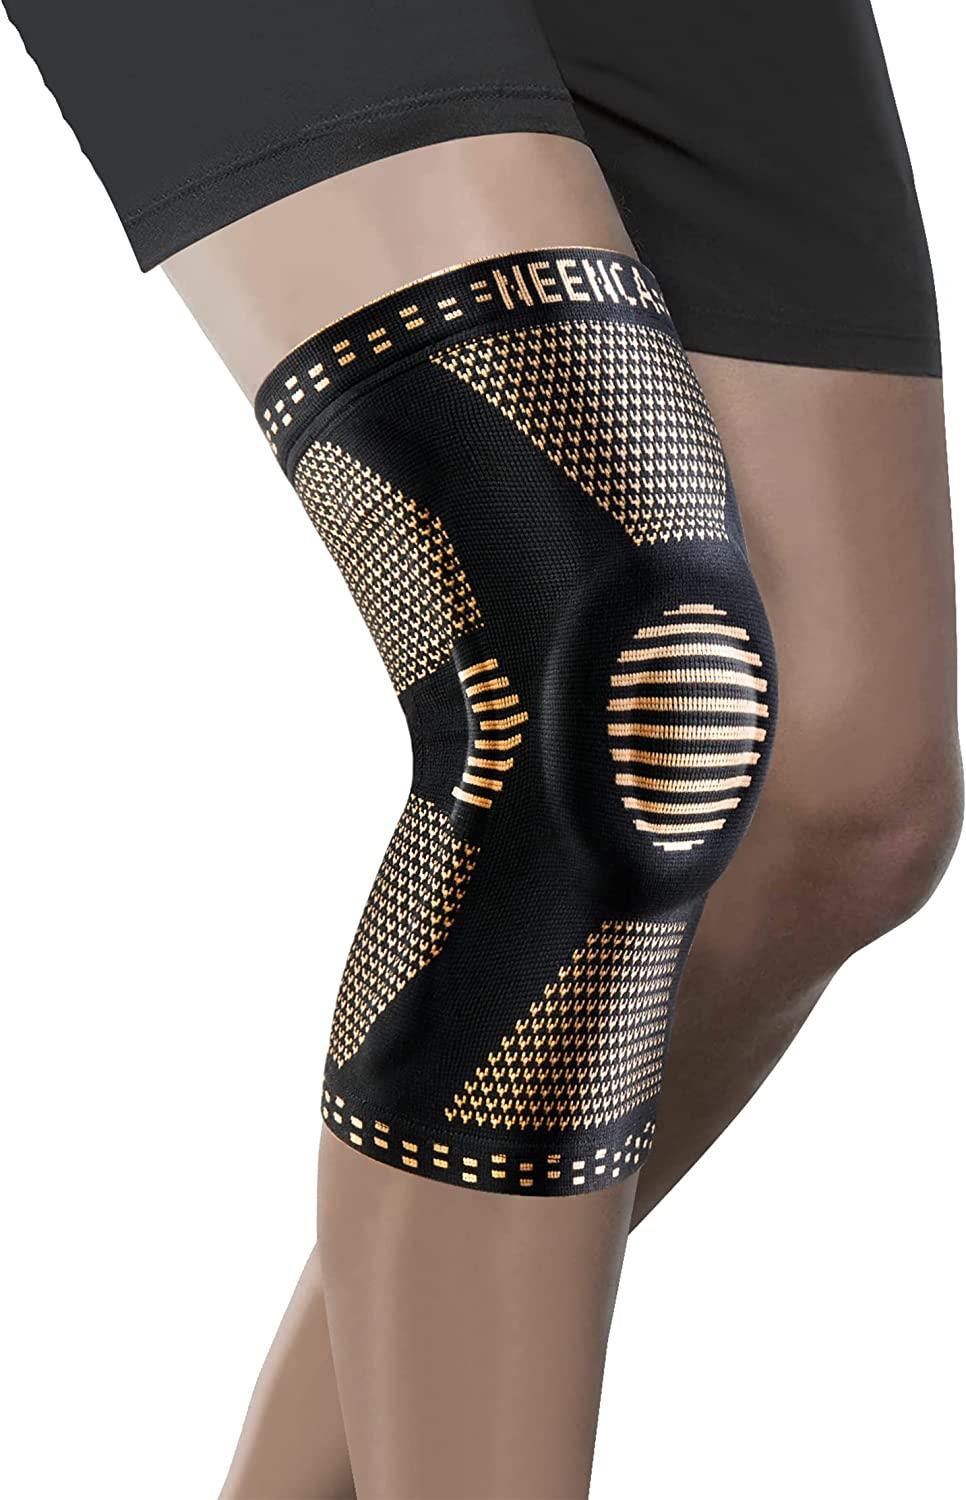 COPPER HEAL Knee Compression Sleeve Recovery Knee Brace GUARANTEED